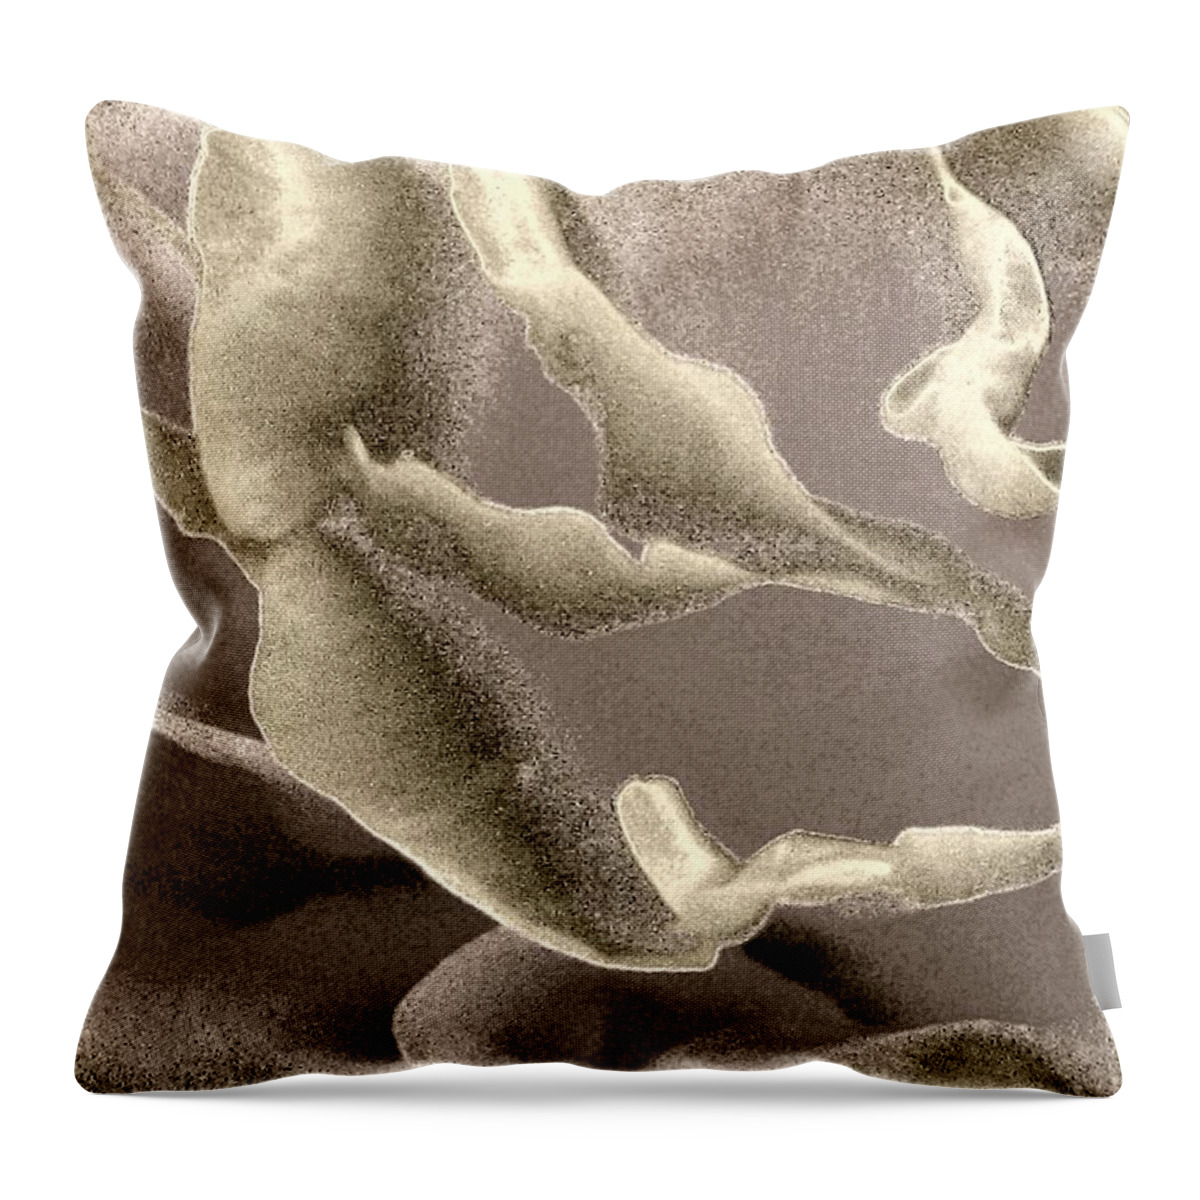 Surrender Throw Pillow featuring the photograph Surrender by Jacqueline McReynolds